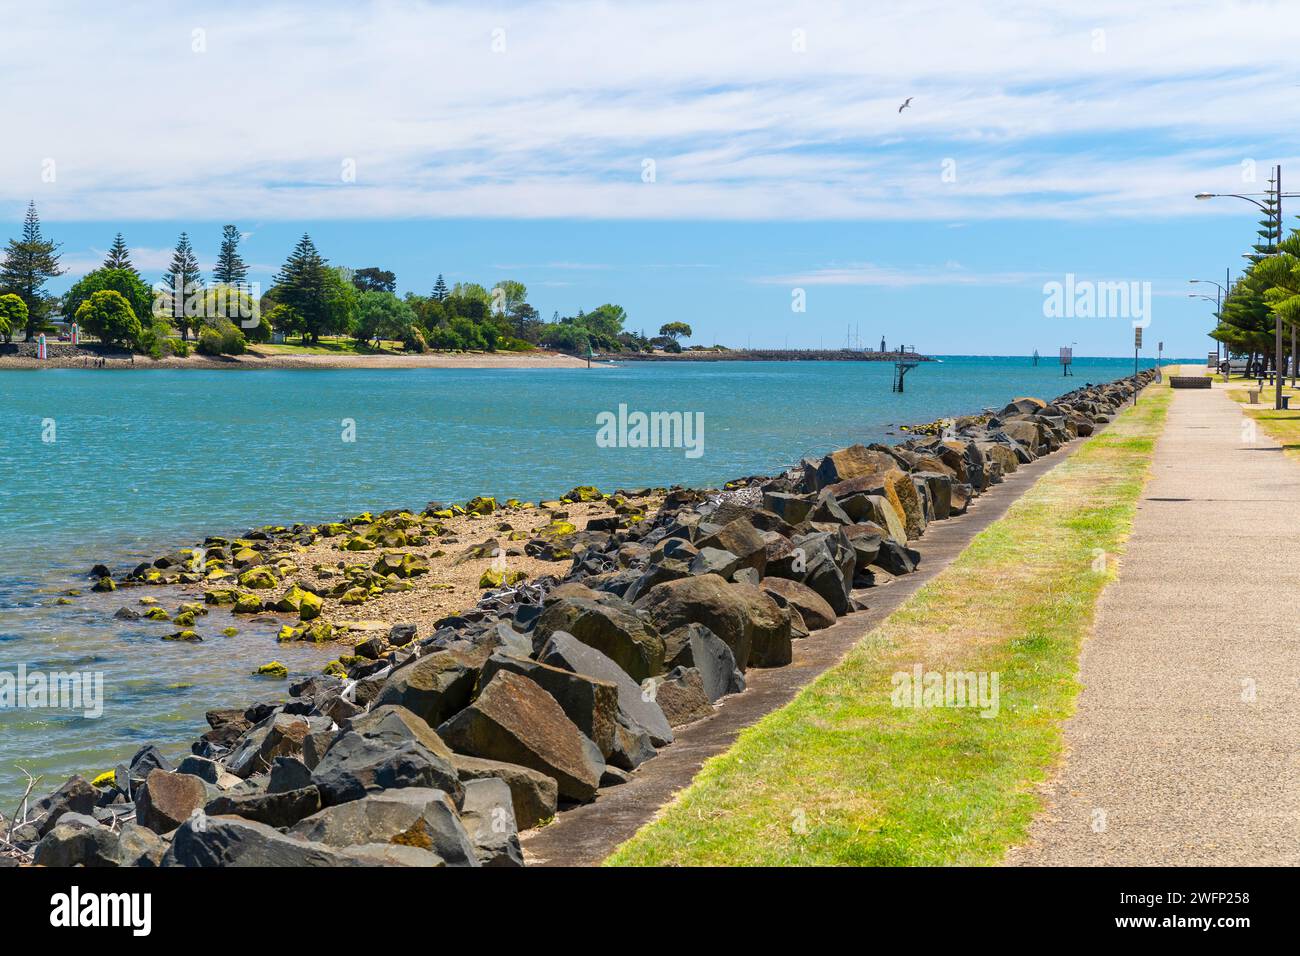 The Mersey River and Devonport in Tasmania, Australia, seen from the Heritage Walking Track in East Devonport. Stock Photo